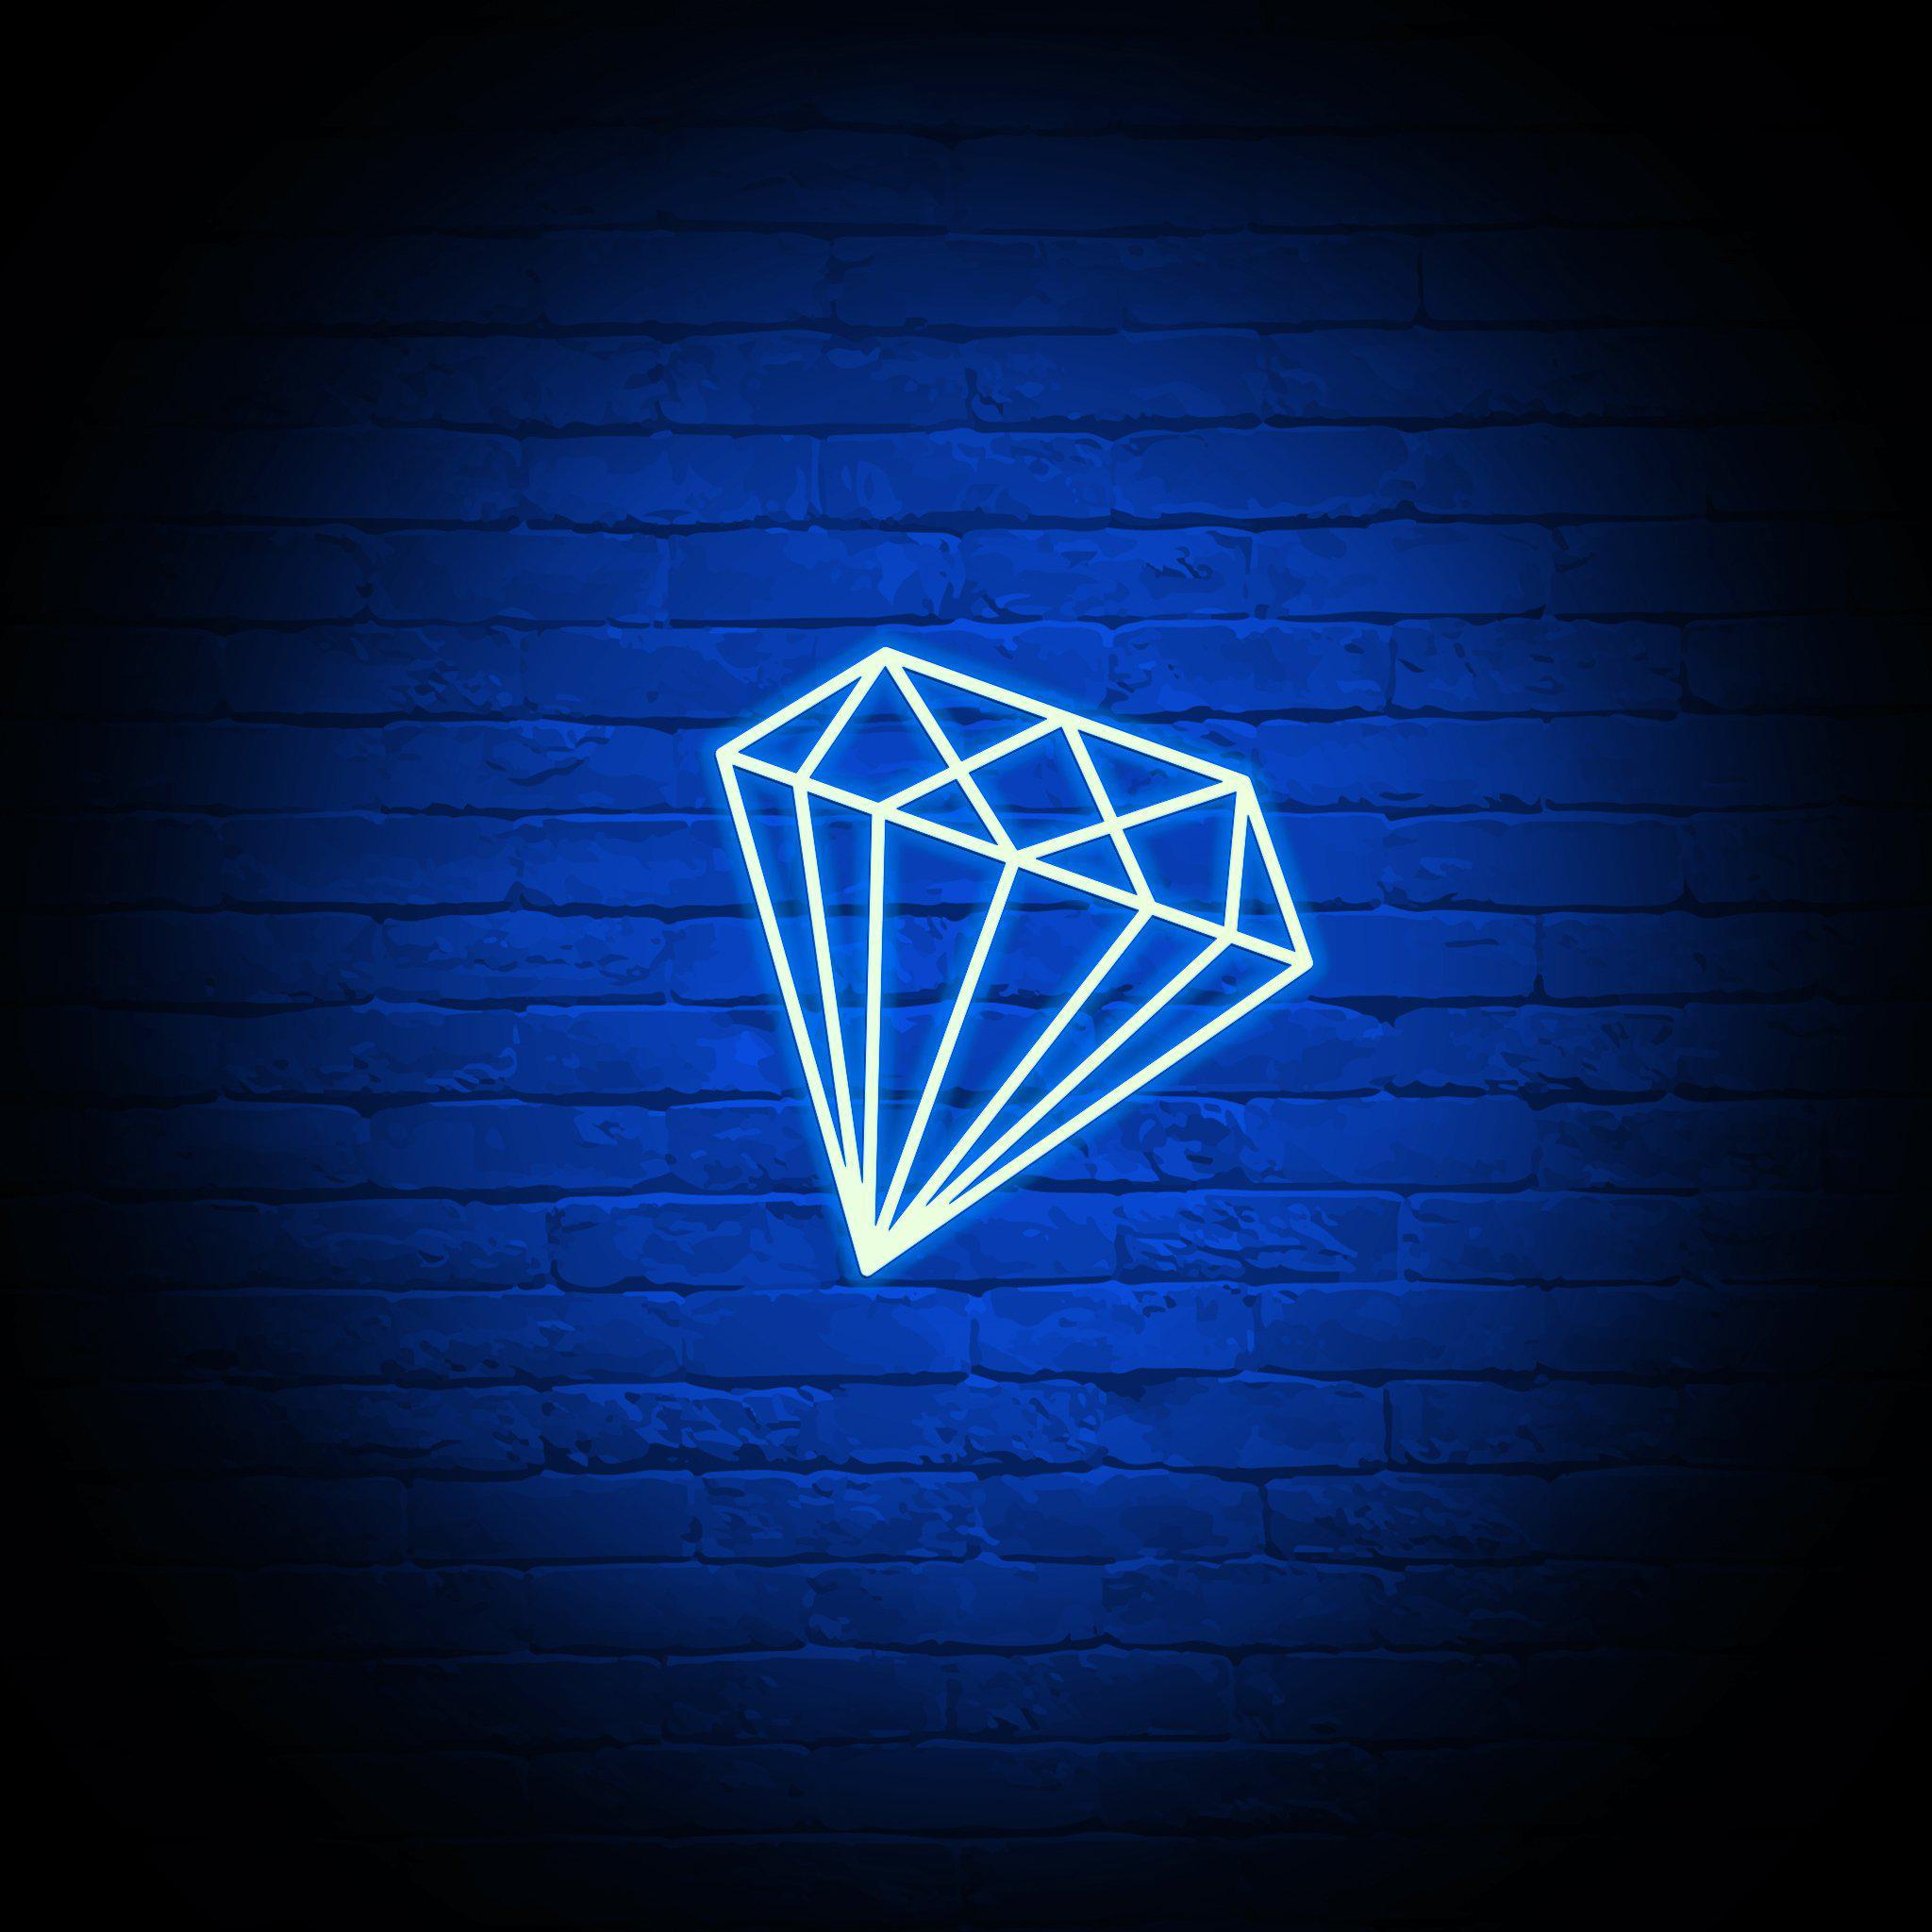 A neon blue sign of a diamond on a brick wall - Neon blue